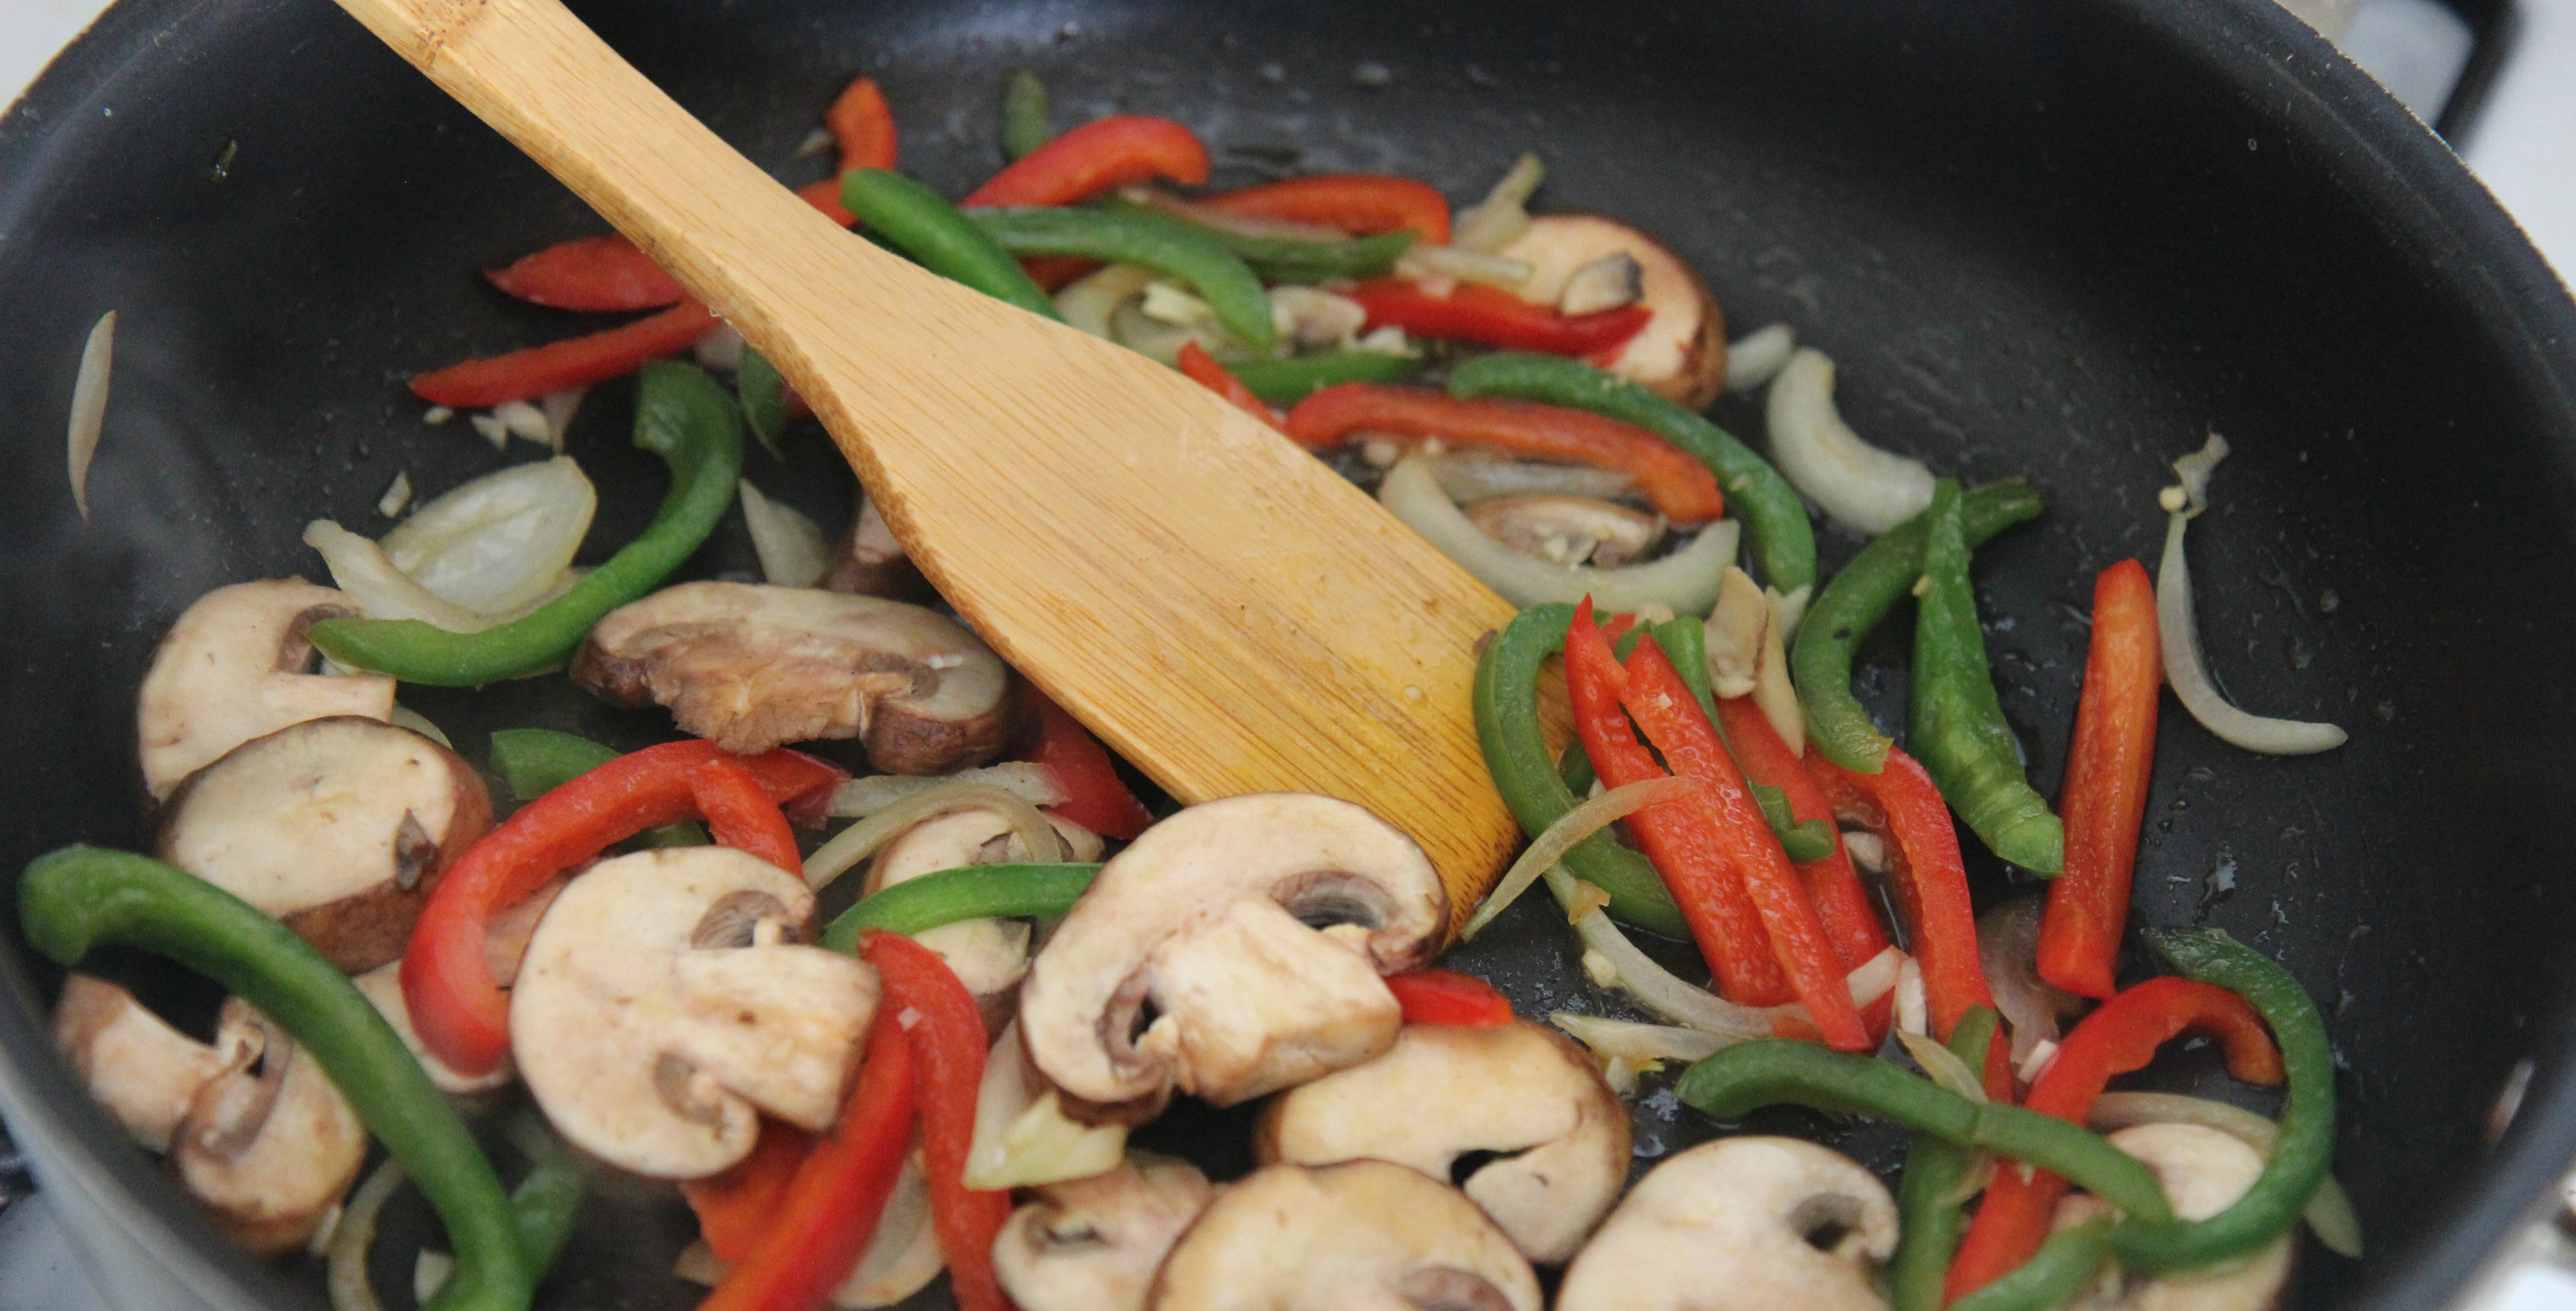 Saute the vegetables together in a skillet with some oil. Vegetables include mushrooms, onions, and red and green peppers. 